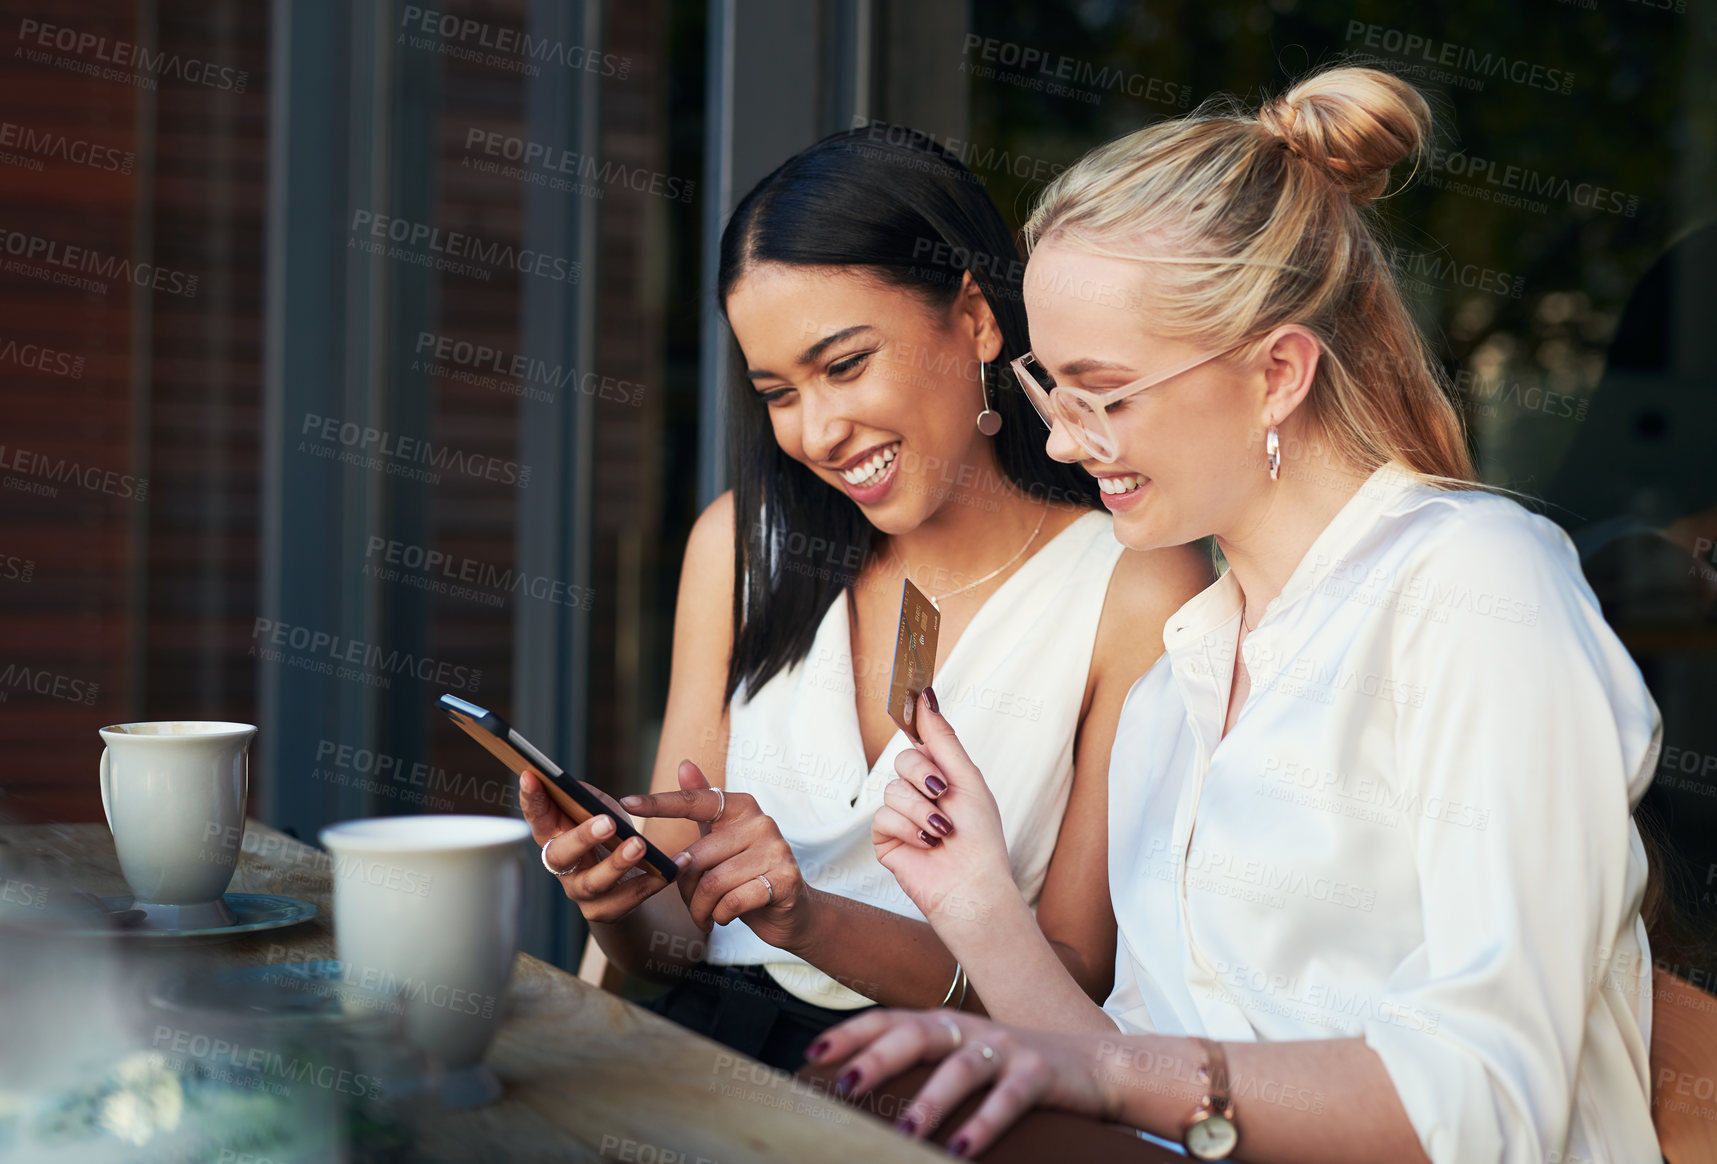 Buy stock photo Shot of a woman using a cellphone while her friend holds up a credit card while sitting together